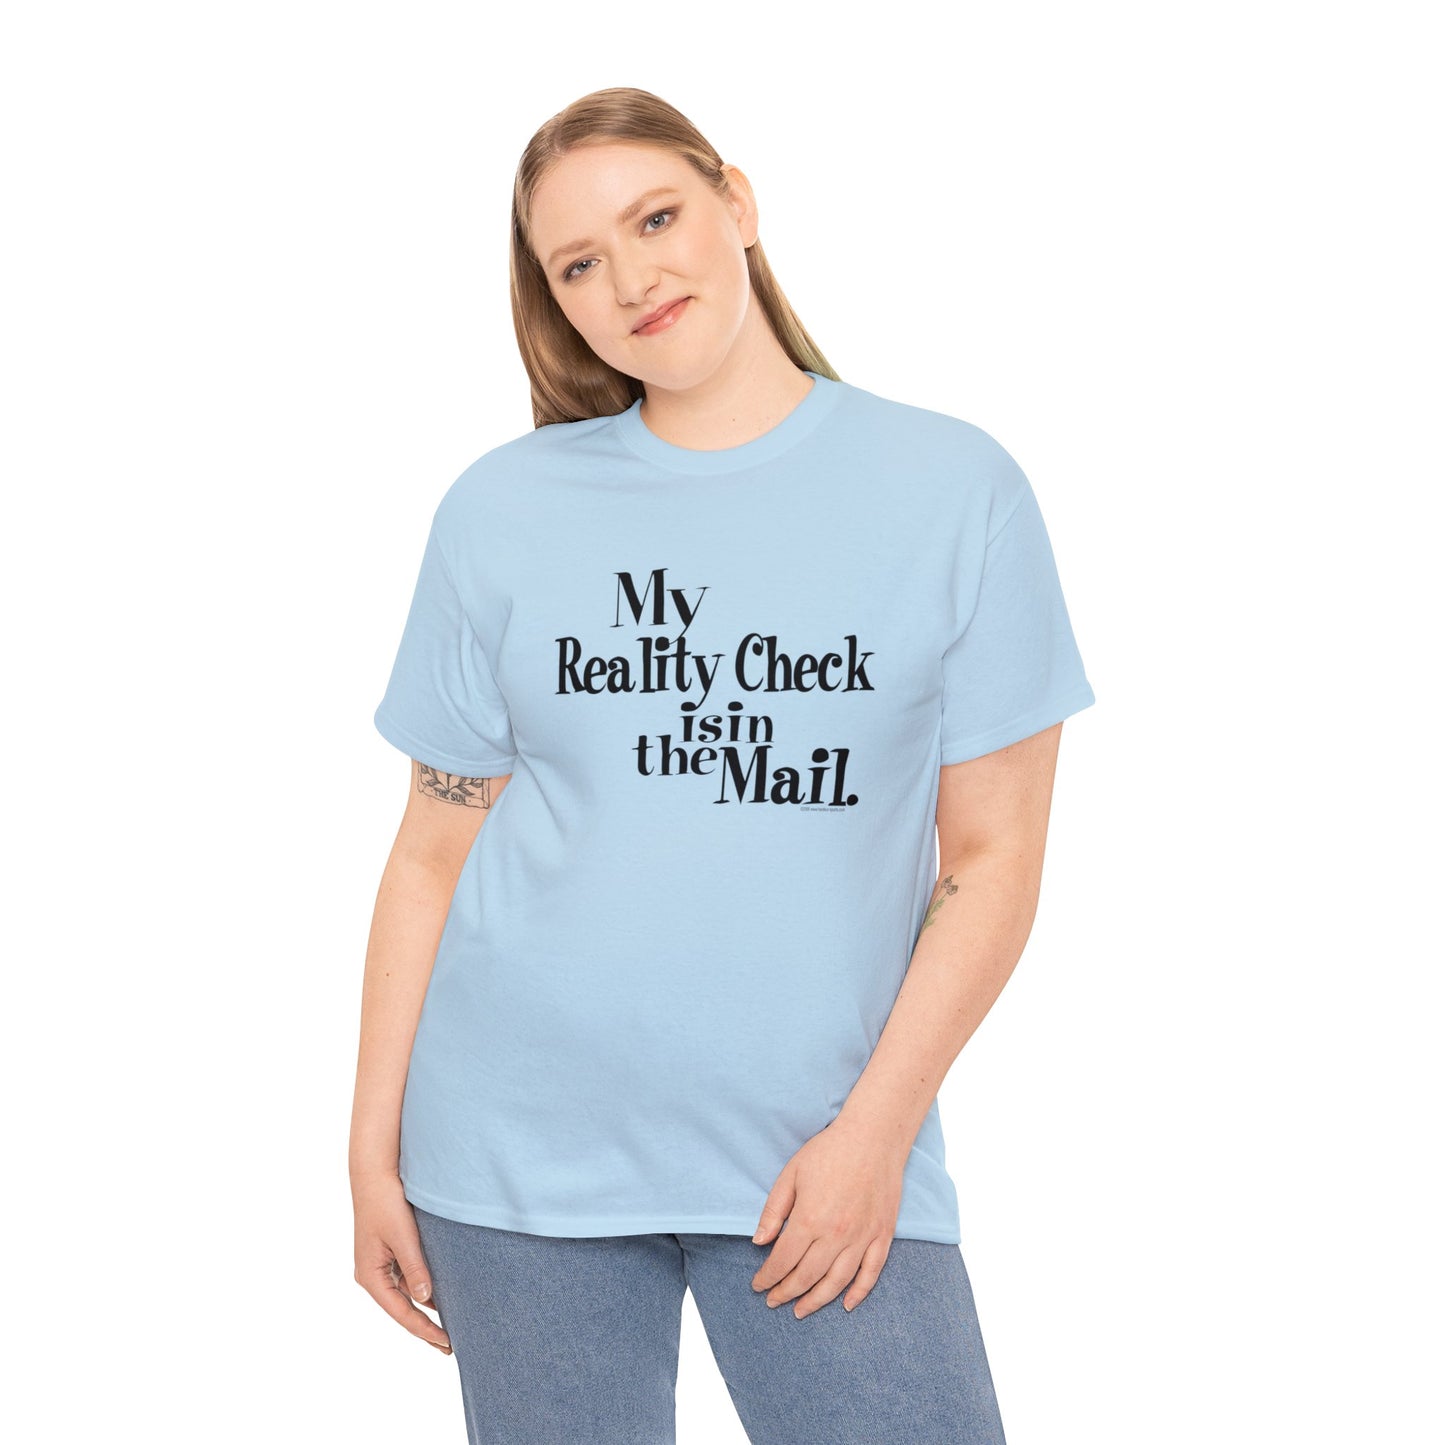 My Reality Check is in the Mail, funny t-shirt, Crazy t-shirt, reality check tee, humorous t-shirt, ironic t-shirt, t-shirt gift, reality T